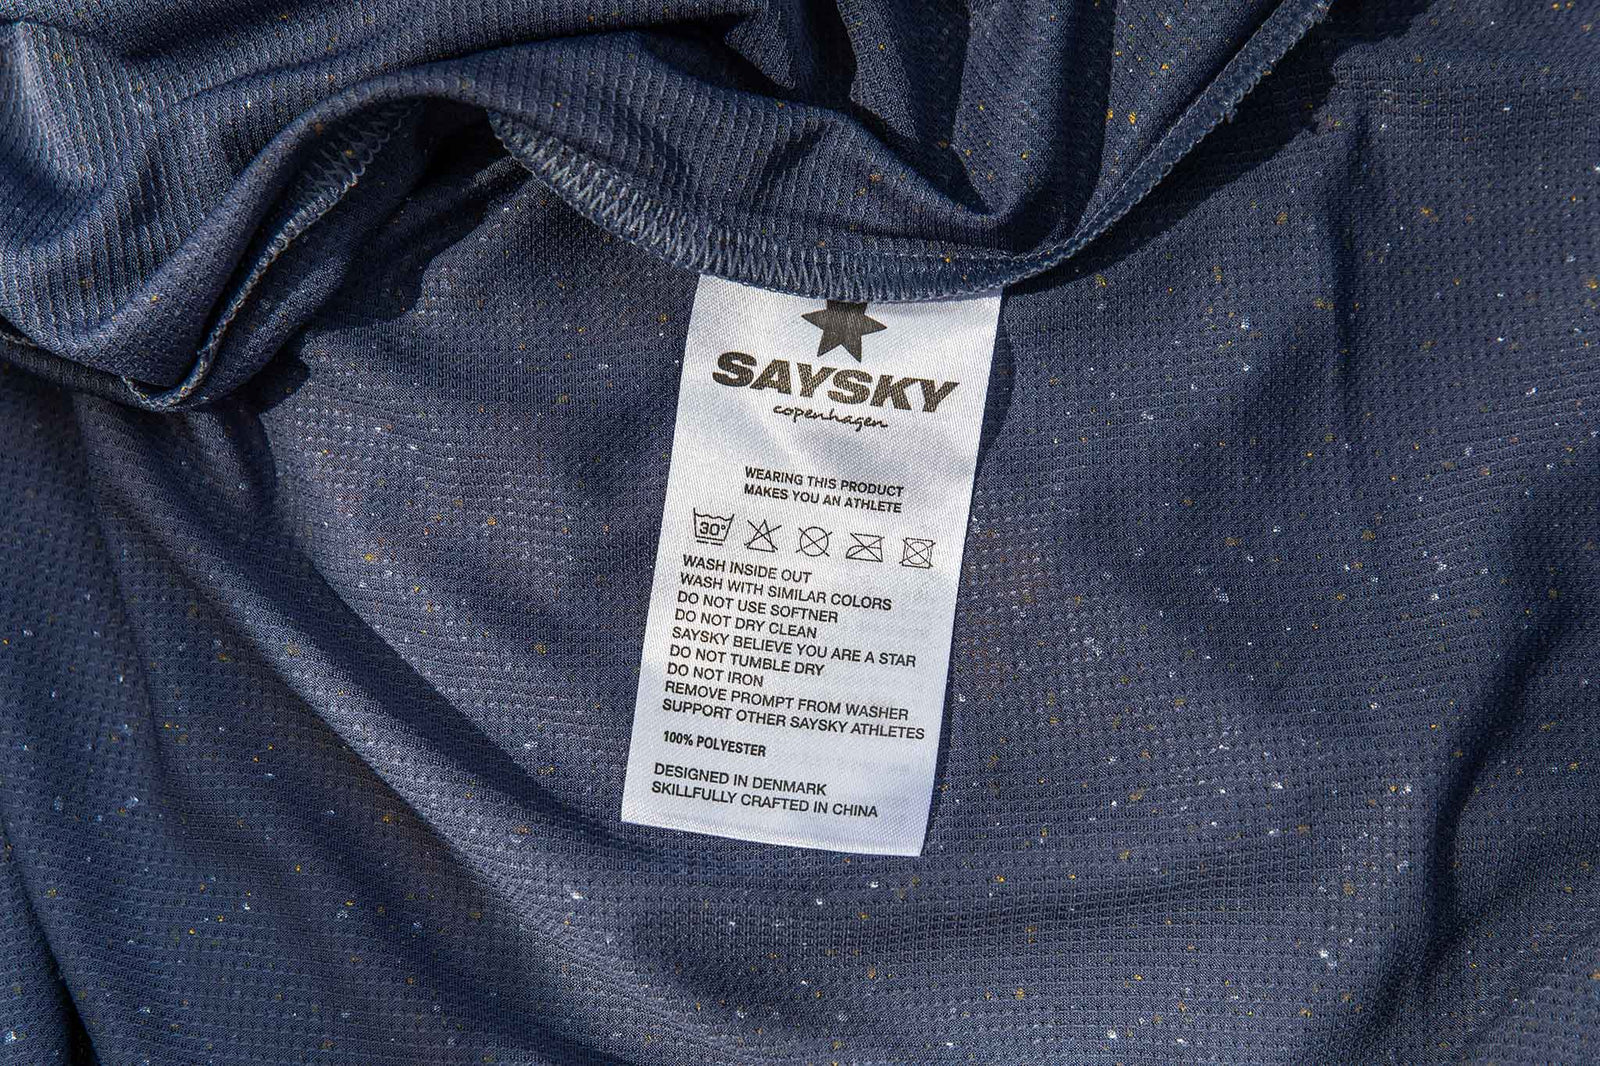 SAYSKY wash and care instructions